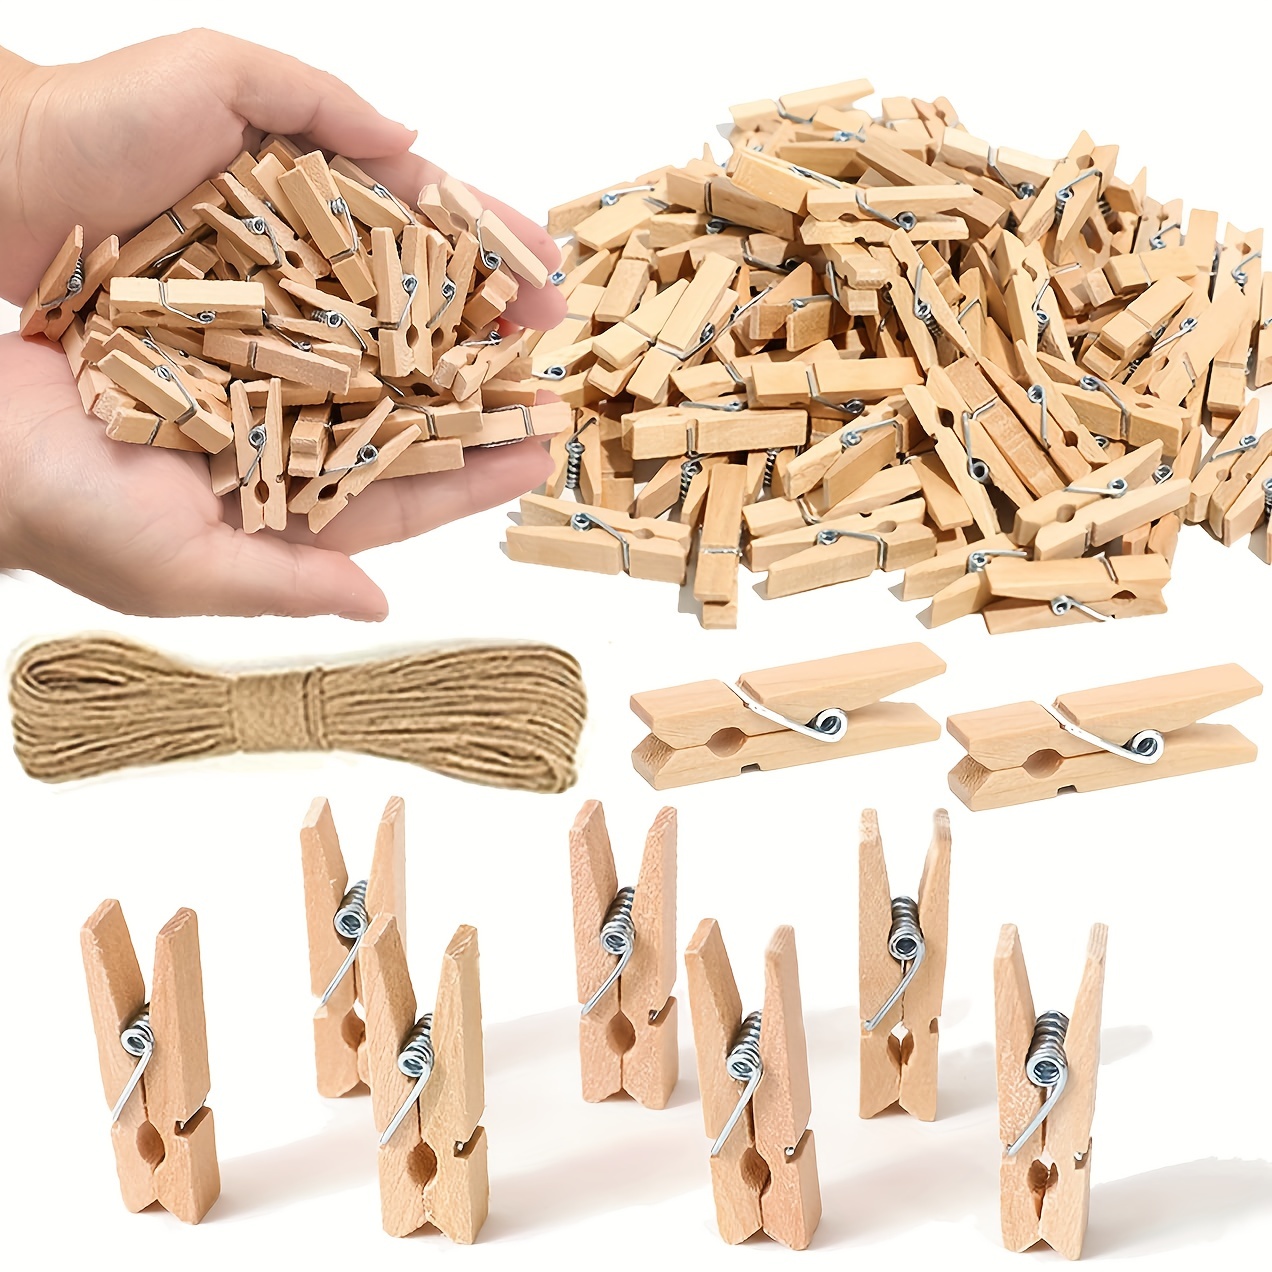 Hesxuno Mini Clothespins for Photos 10 Pcs Mini Natural Wooden Easter Clothespins Photo Paper Card Peg with Line, Men's, Size: One Size